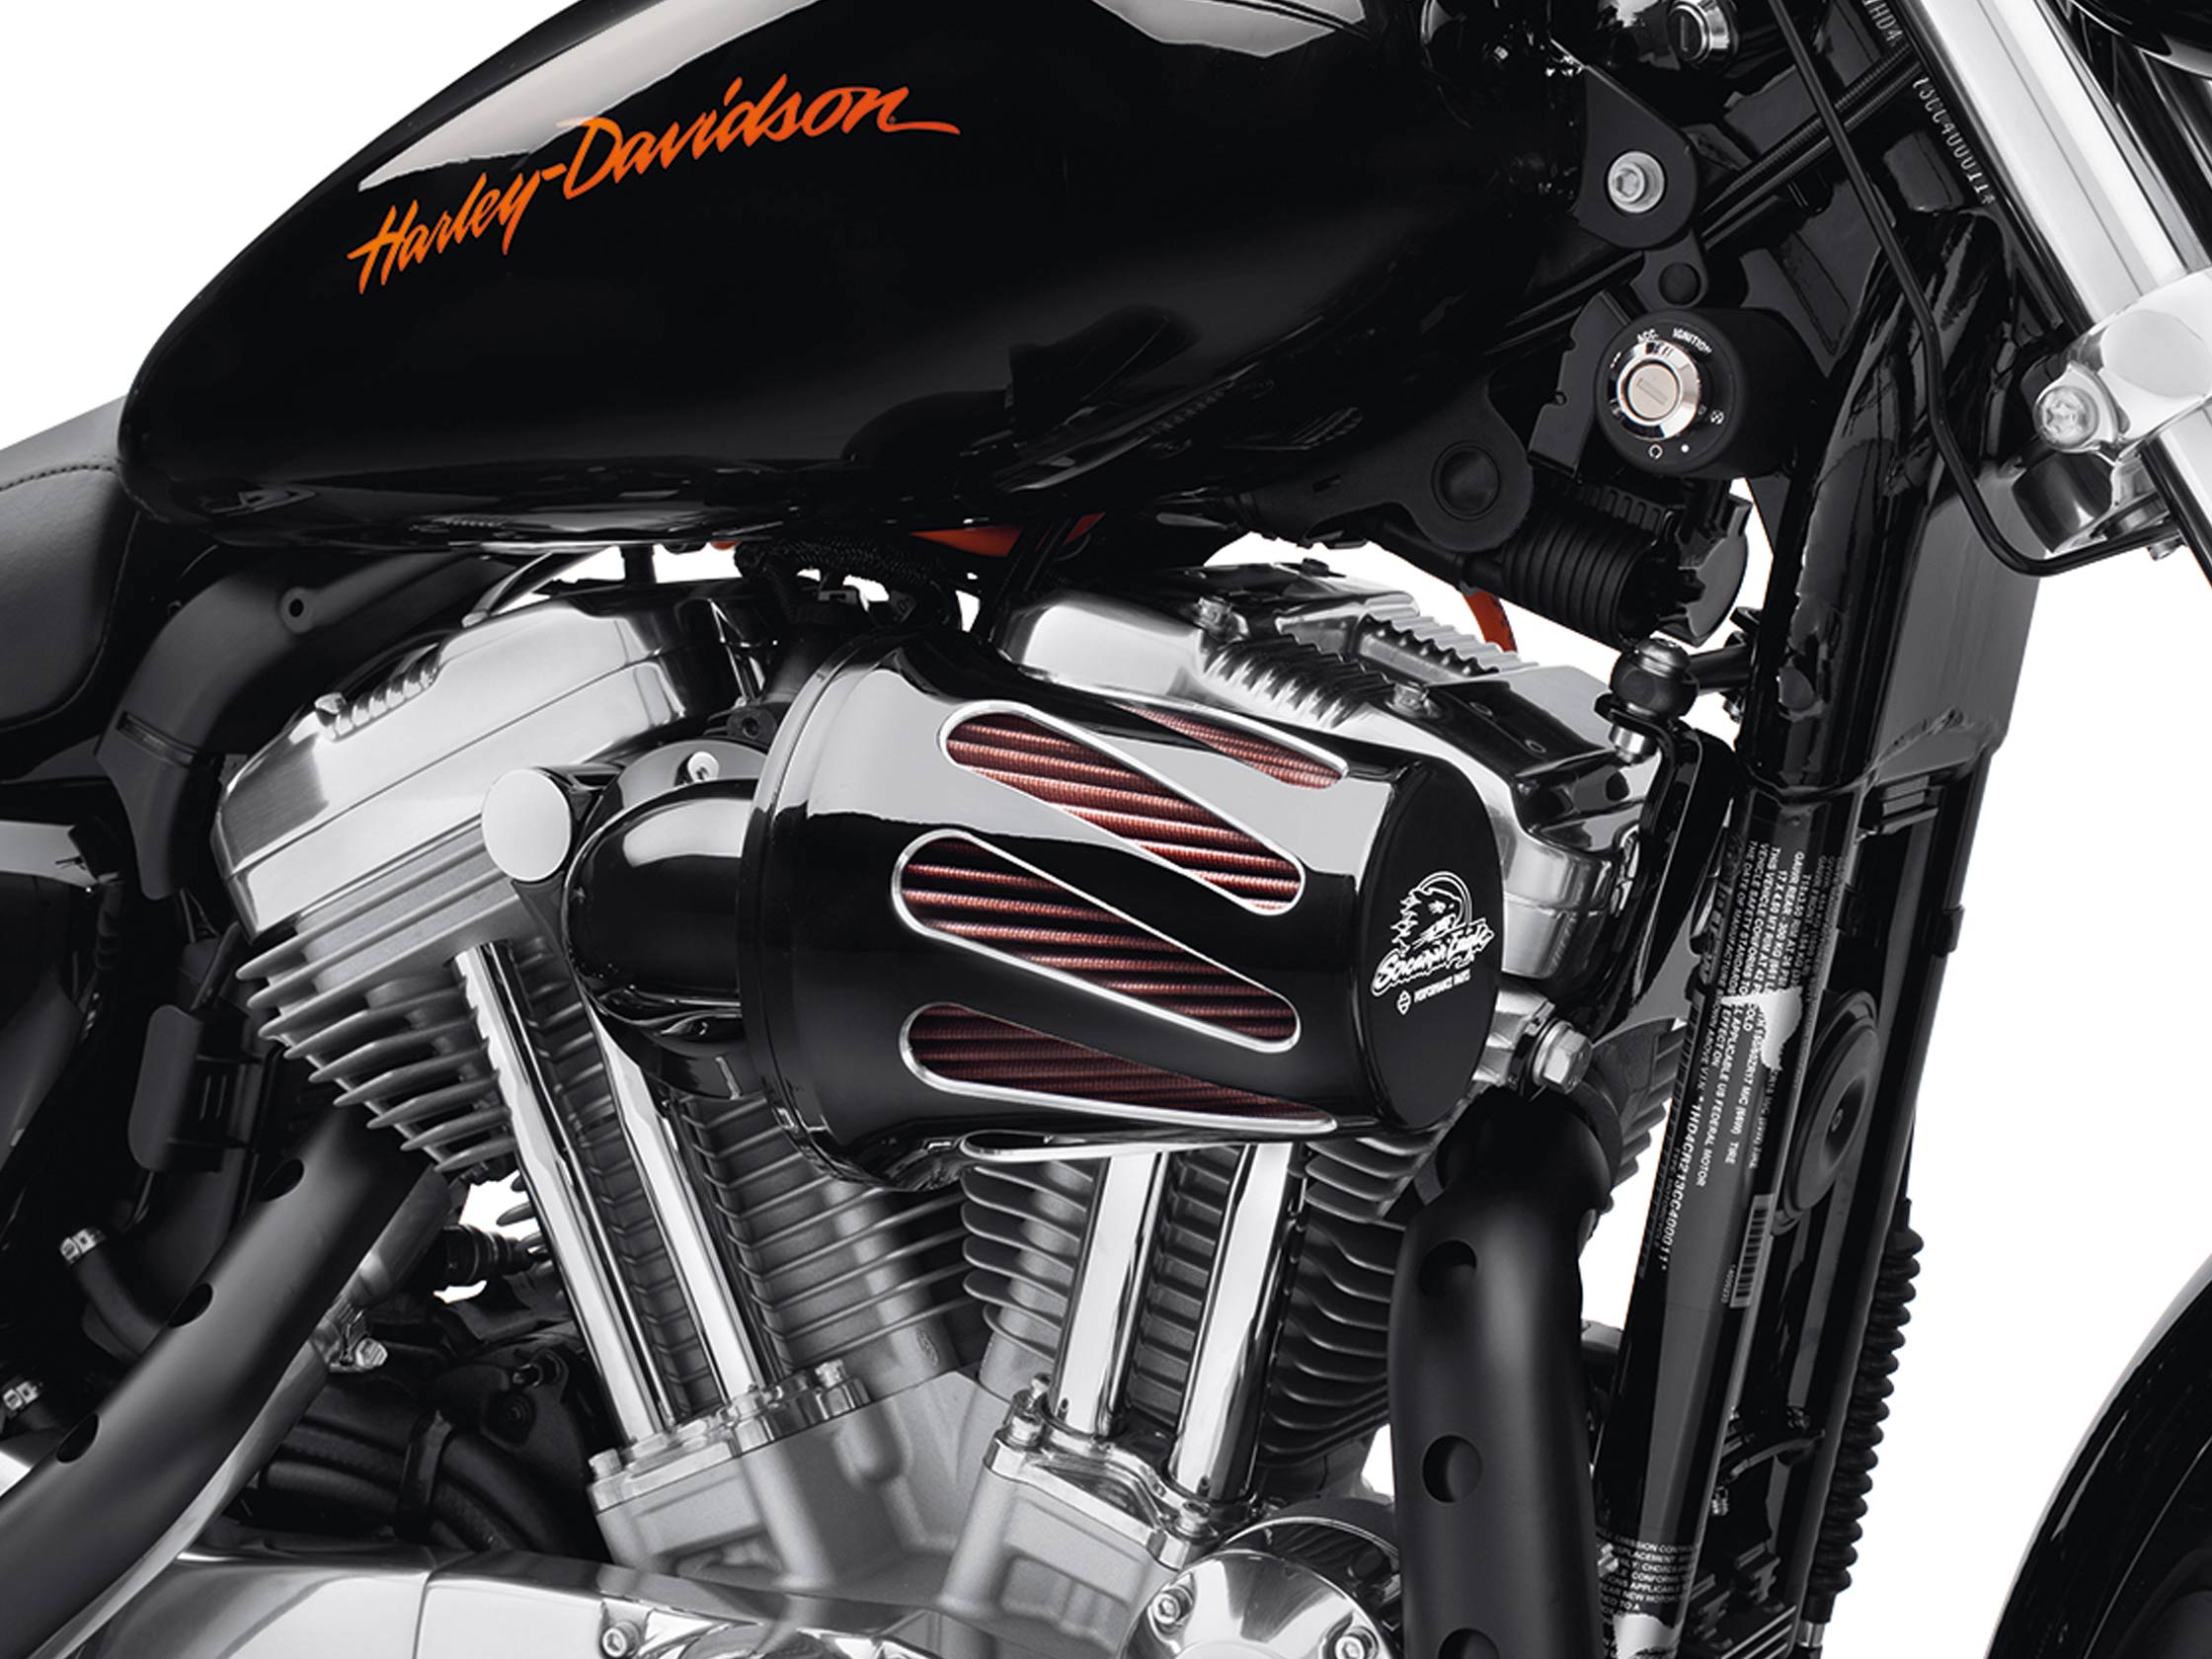 SCREAMIN' EAGLE HEAVY BREATHER FILTERDECKEL - TWISTED SLOT BLACK 28741-10 /  Air Filter Kits / Screamin´ eagle / Parts & Accessories / - House-of-Flames  Harley-Davidson